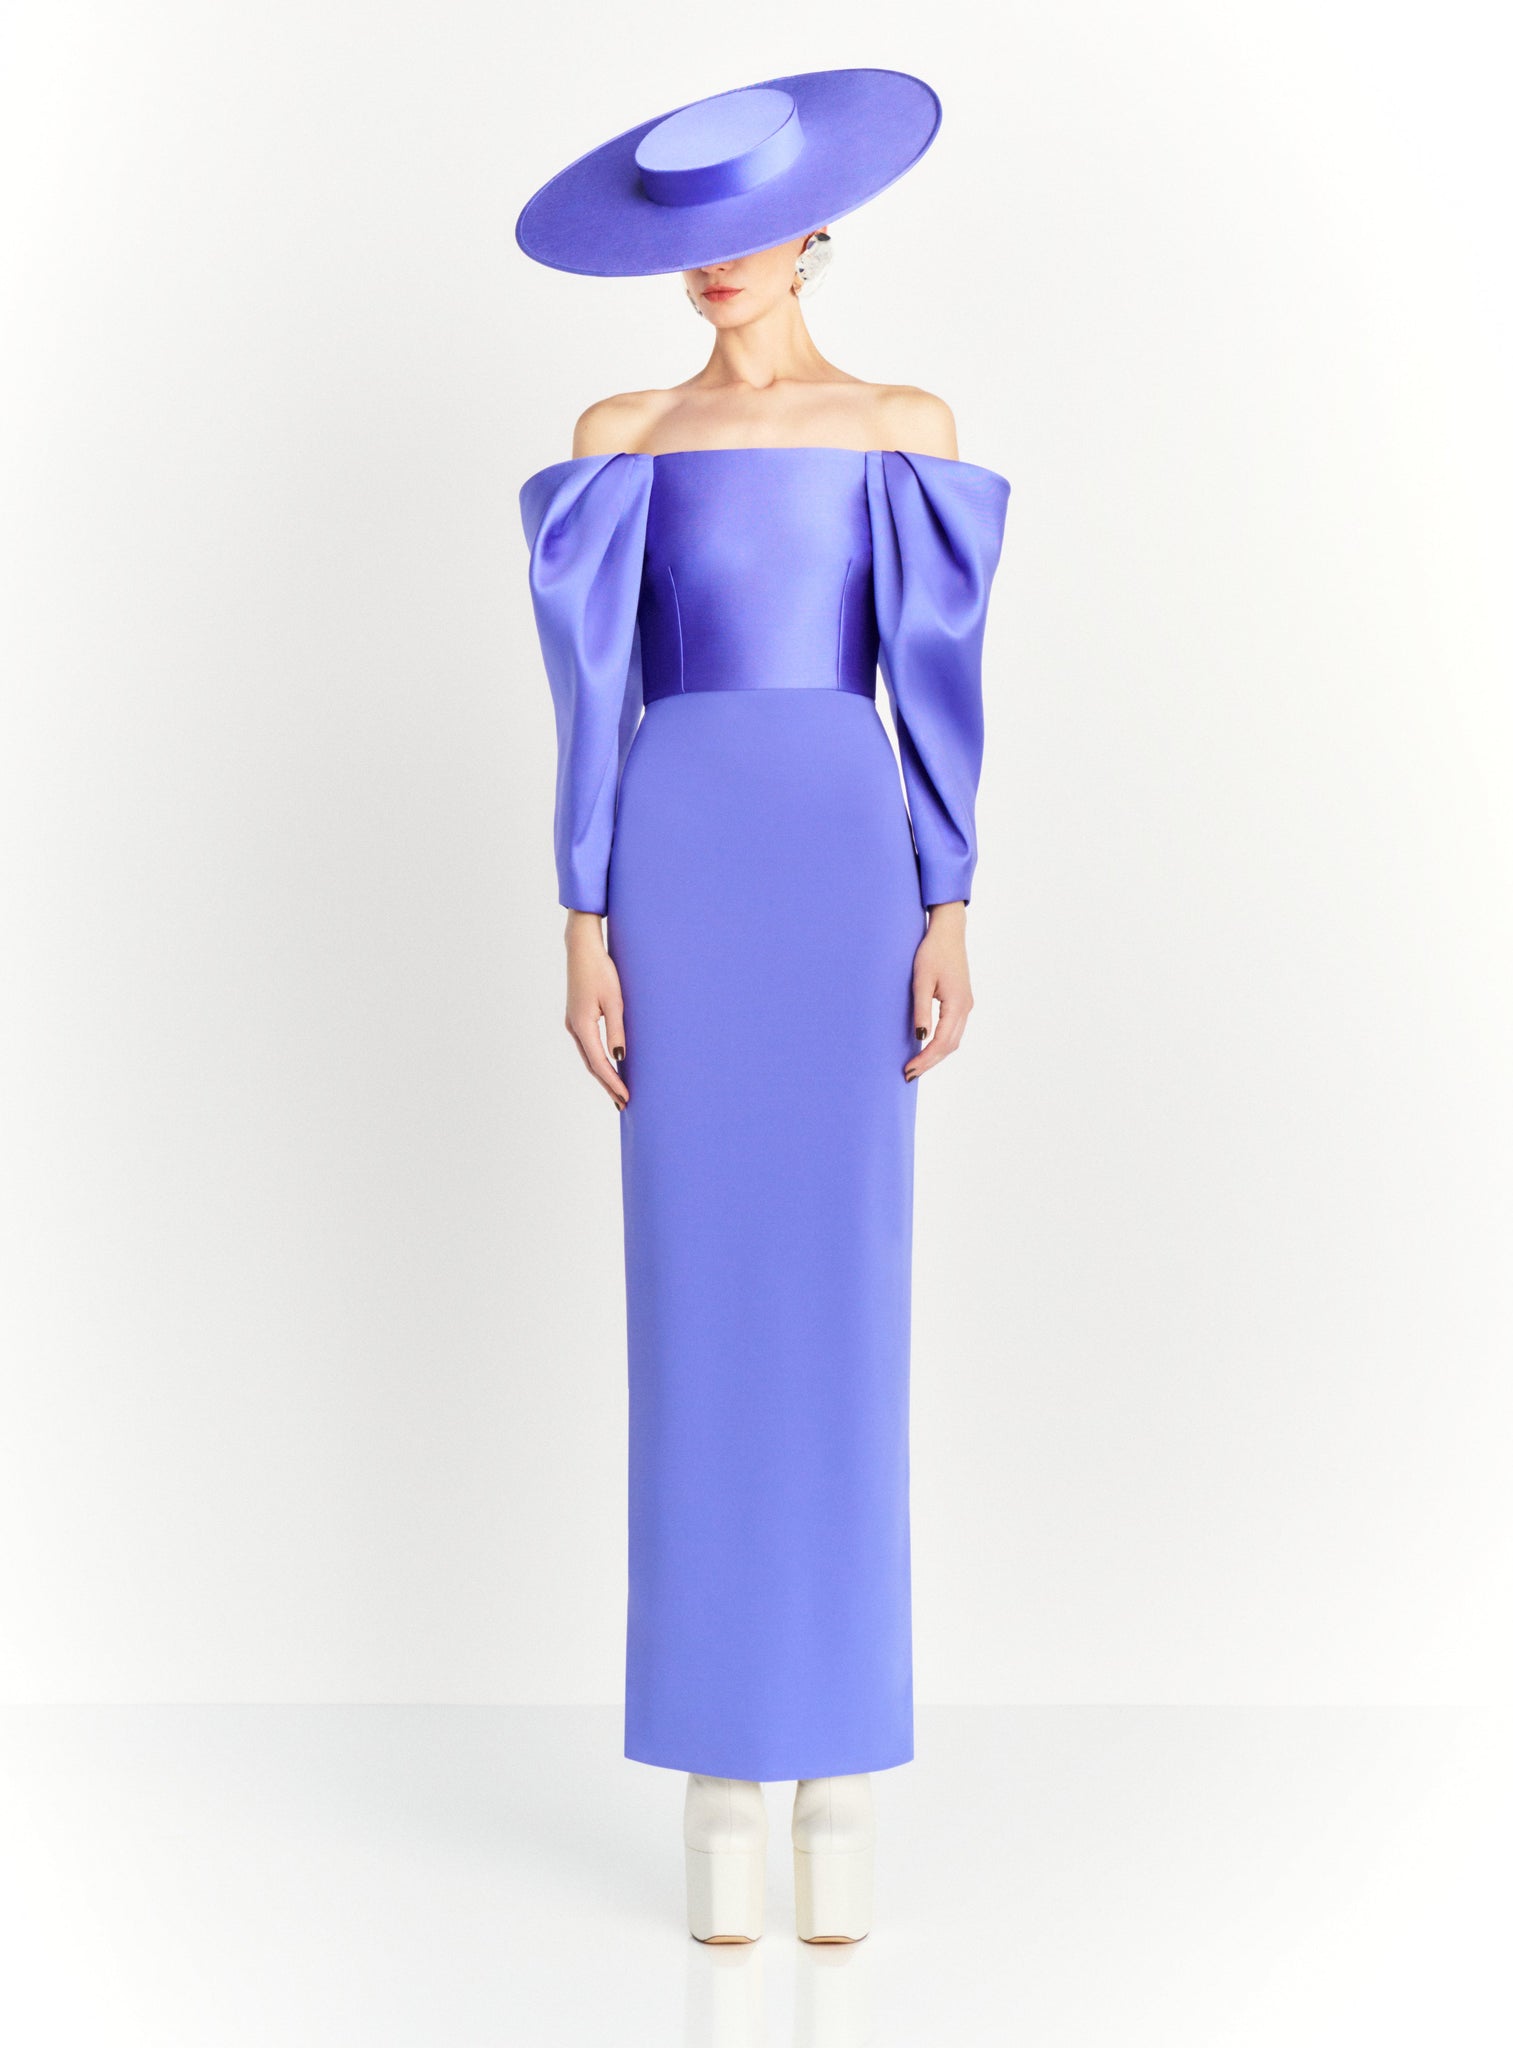 The Melina Maxi Dress in Periwinkle